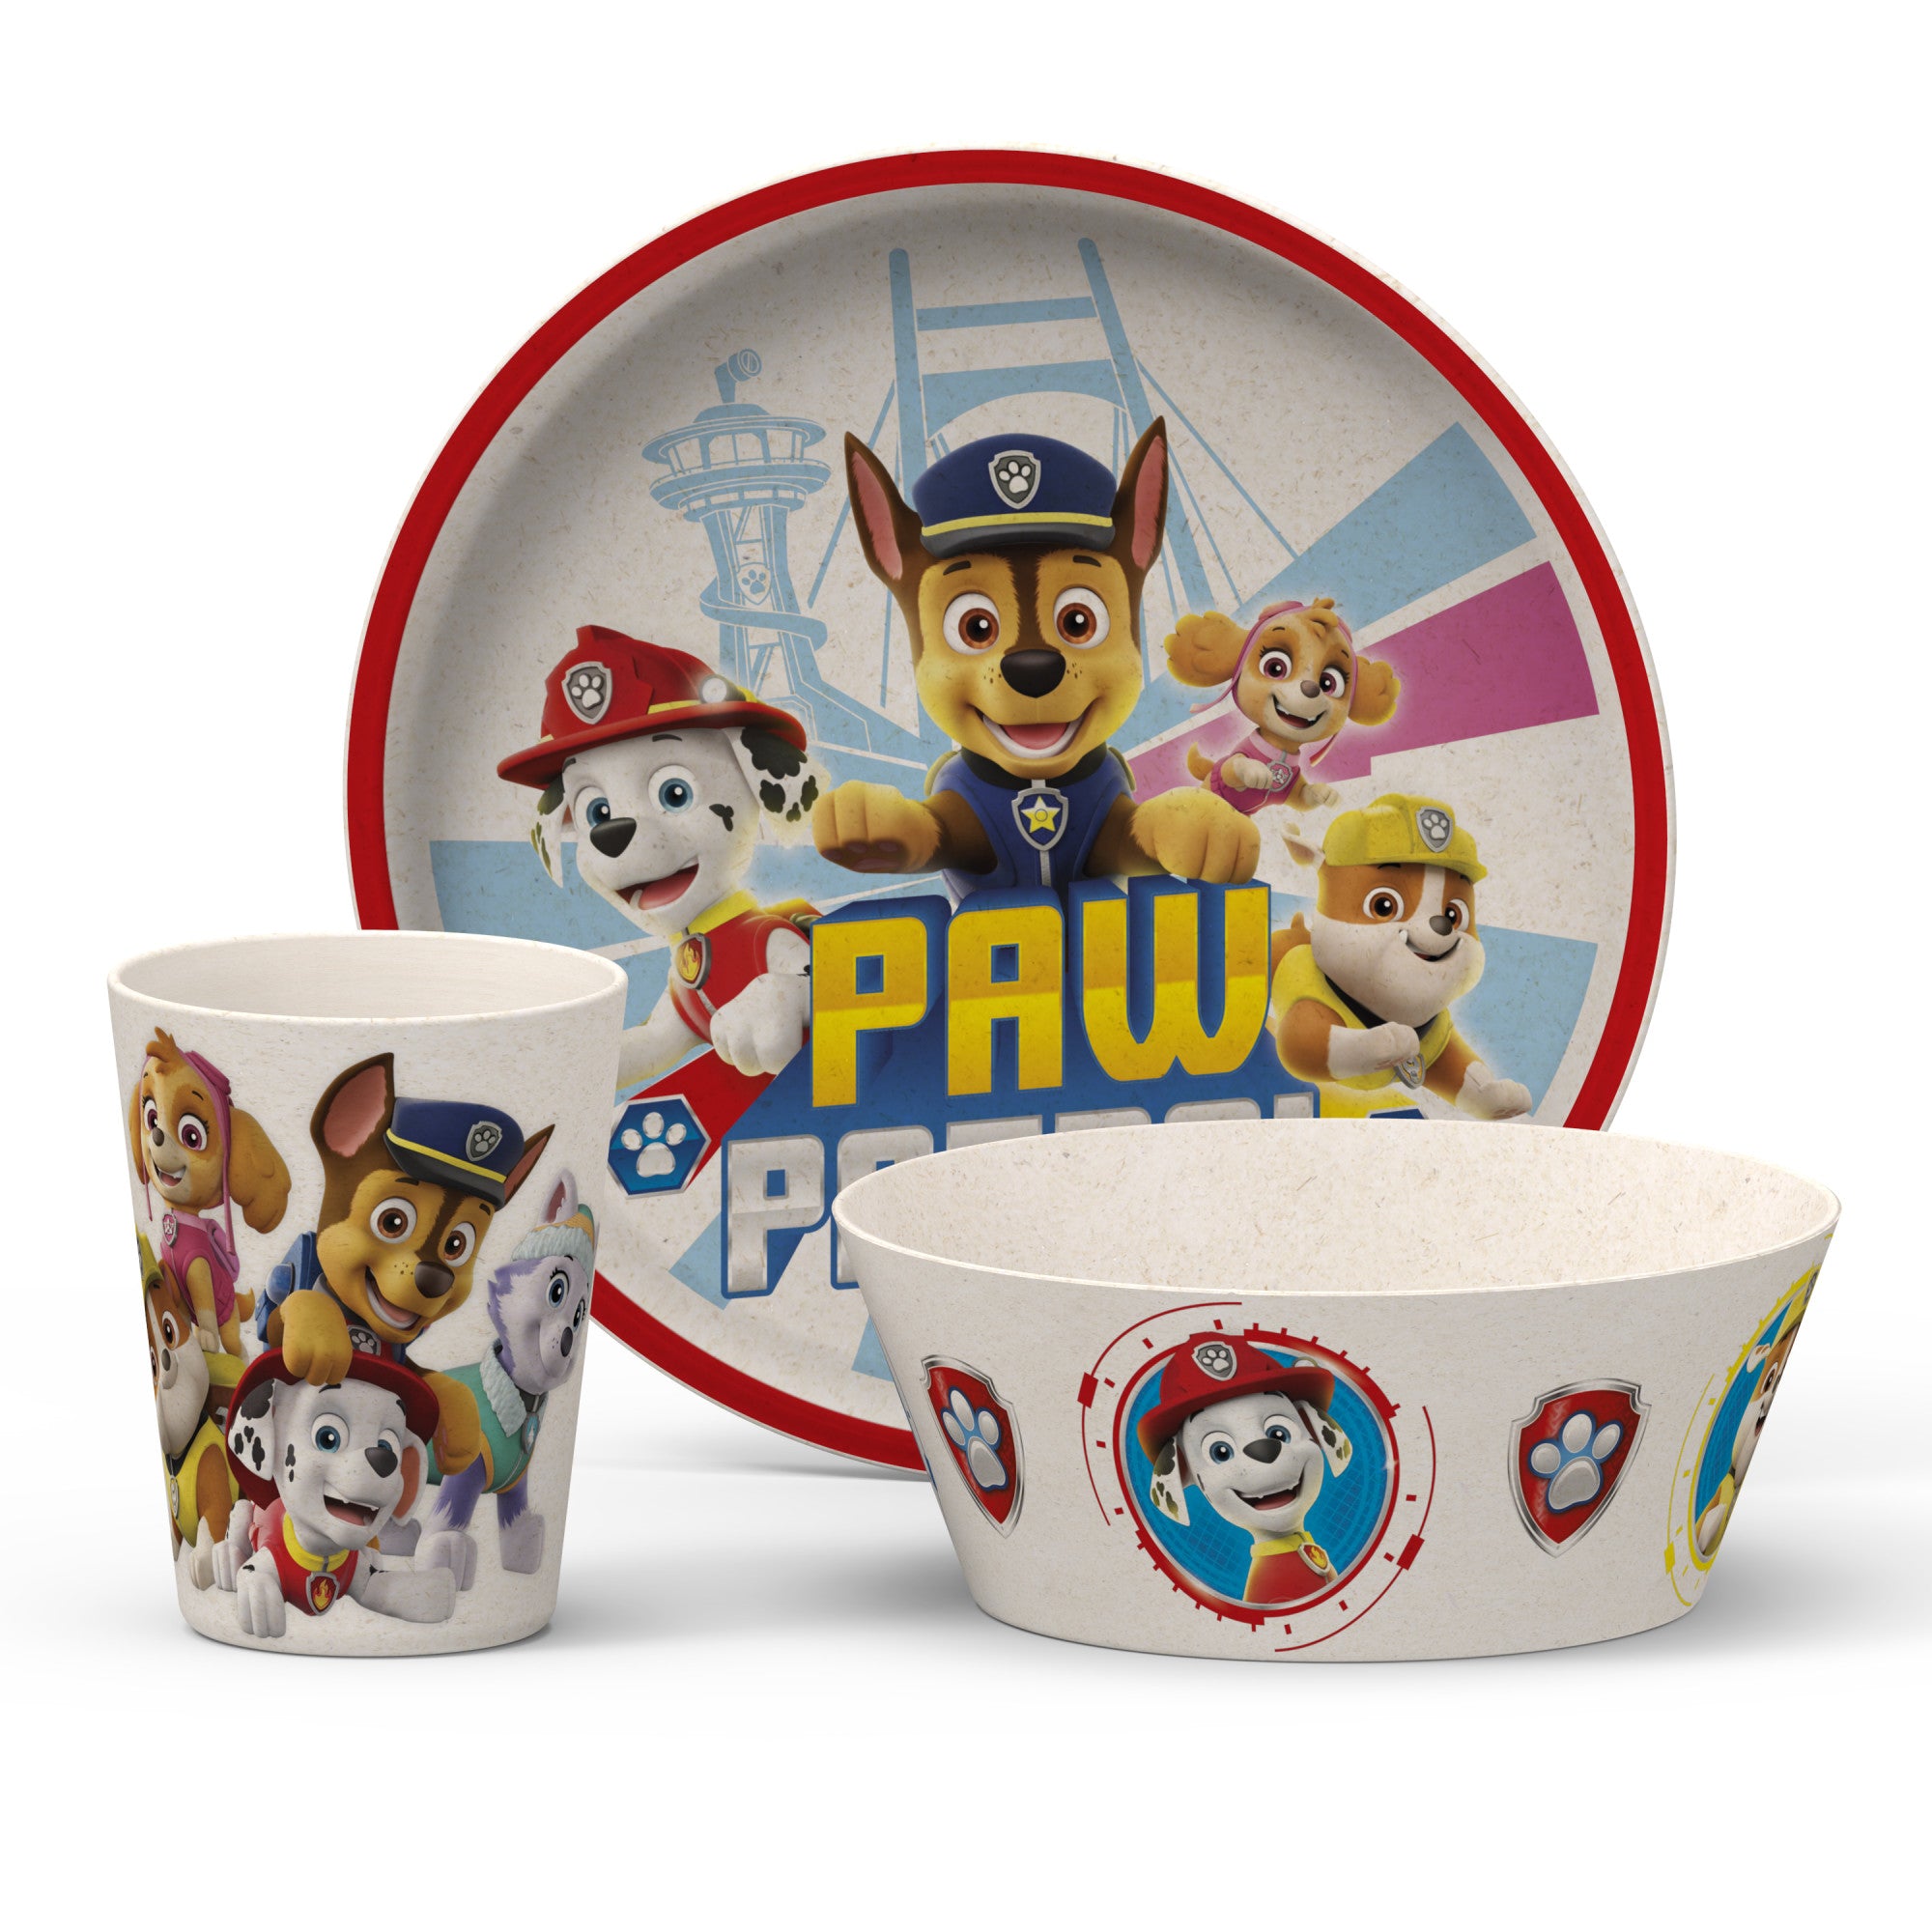 Zak Designs Bluey Kids Dinnerware Set 3 Pieces, Durable and  Sustainable Melamine Bamboo Plate, Bowl, and Tumbler are Perfect For Dinner  Time With Family (Bluey, Bingo, Bandit, Chilli): Serving Bowls